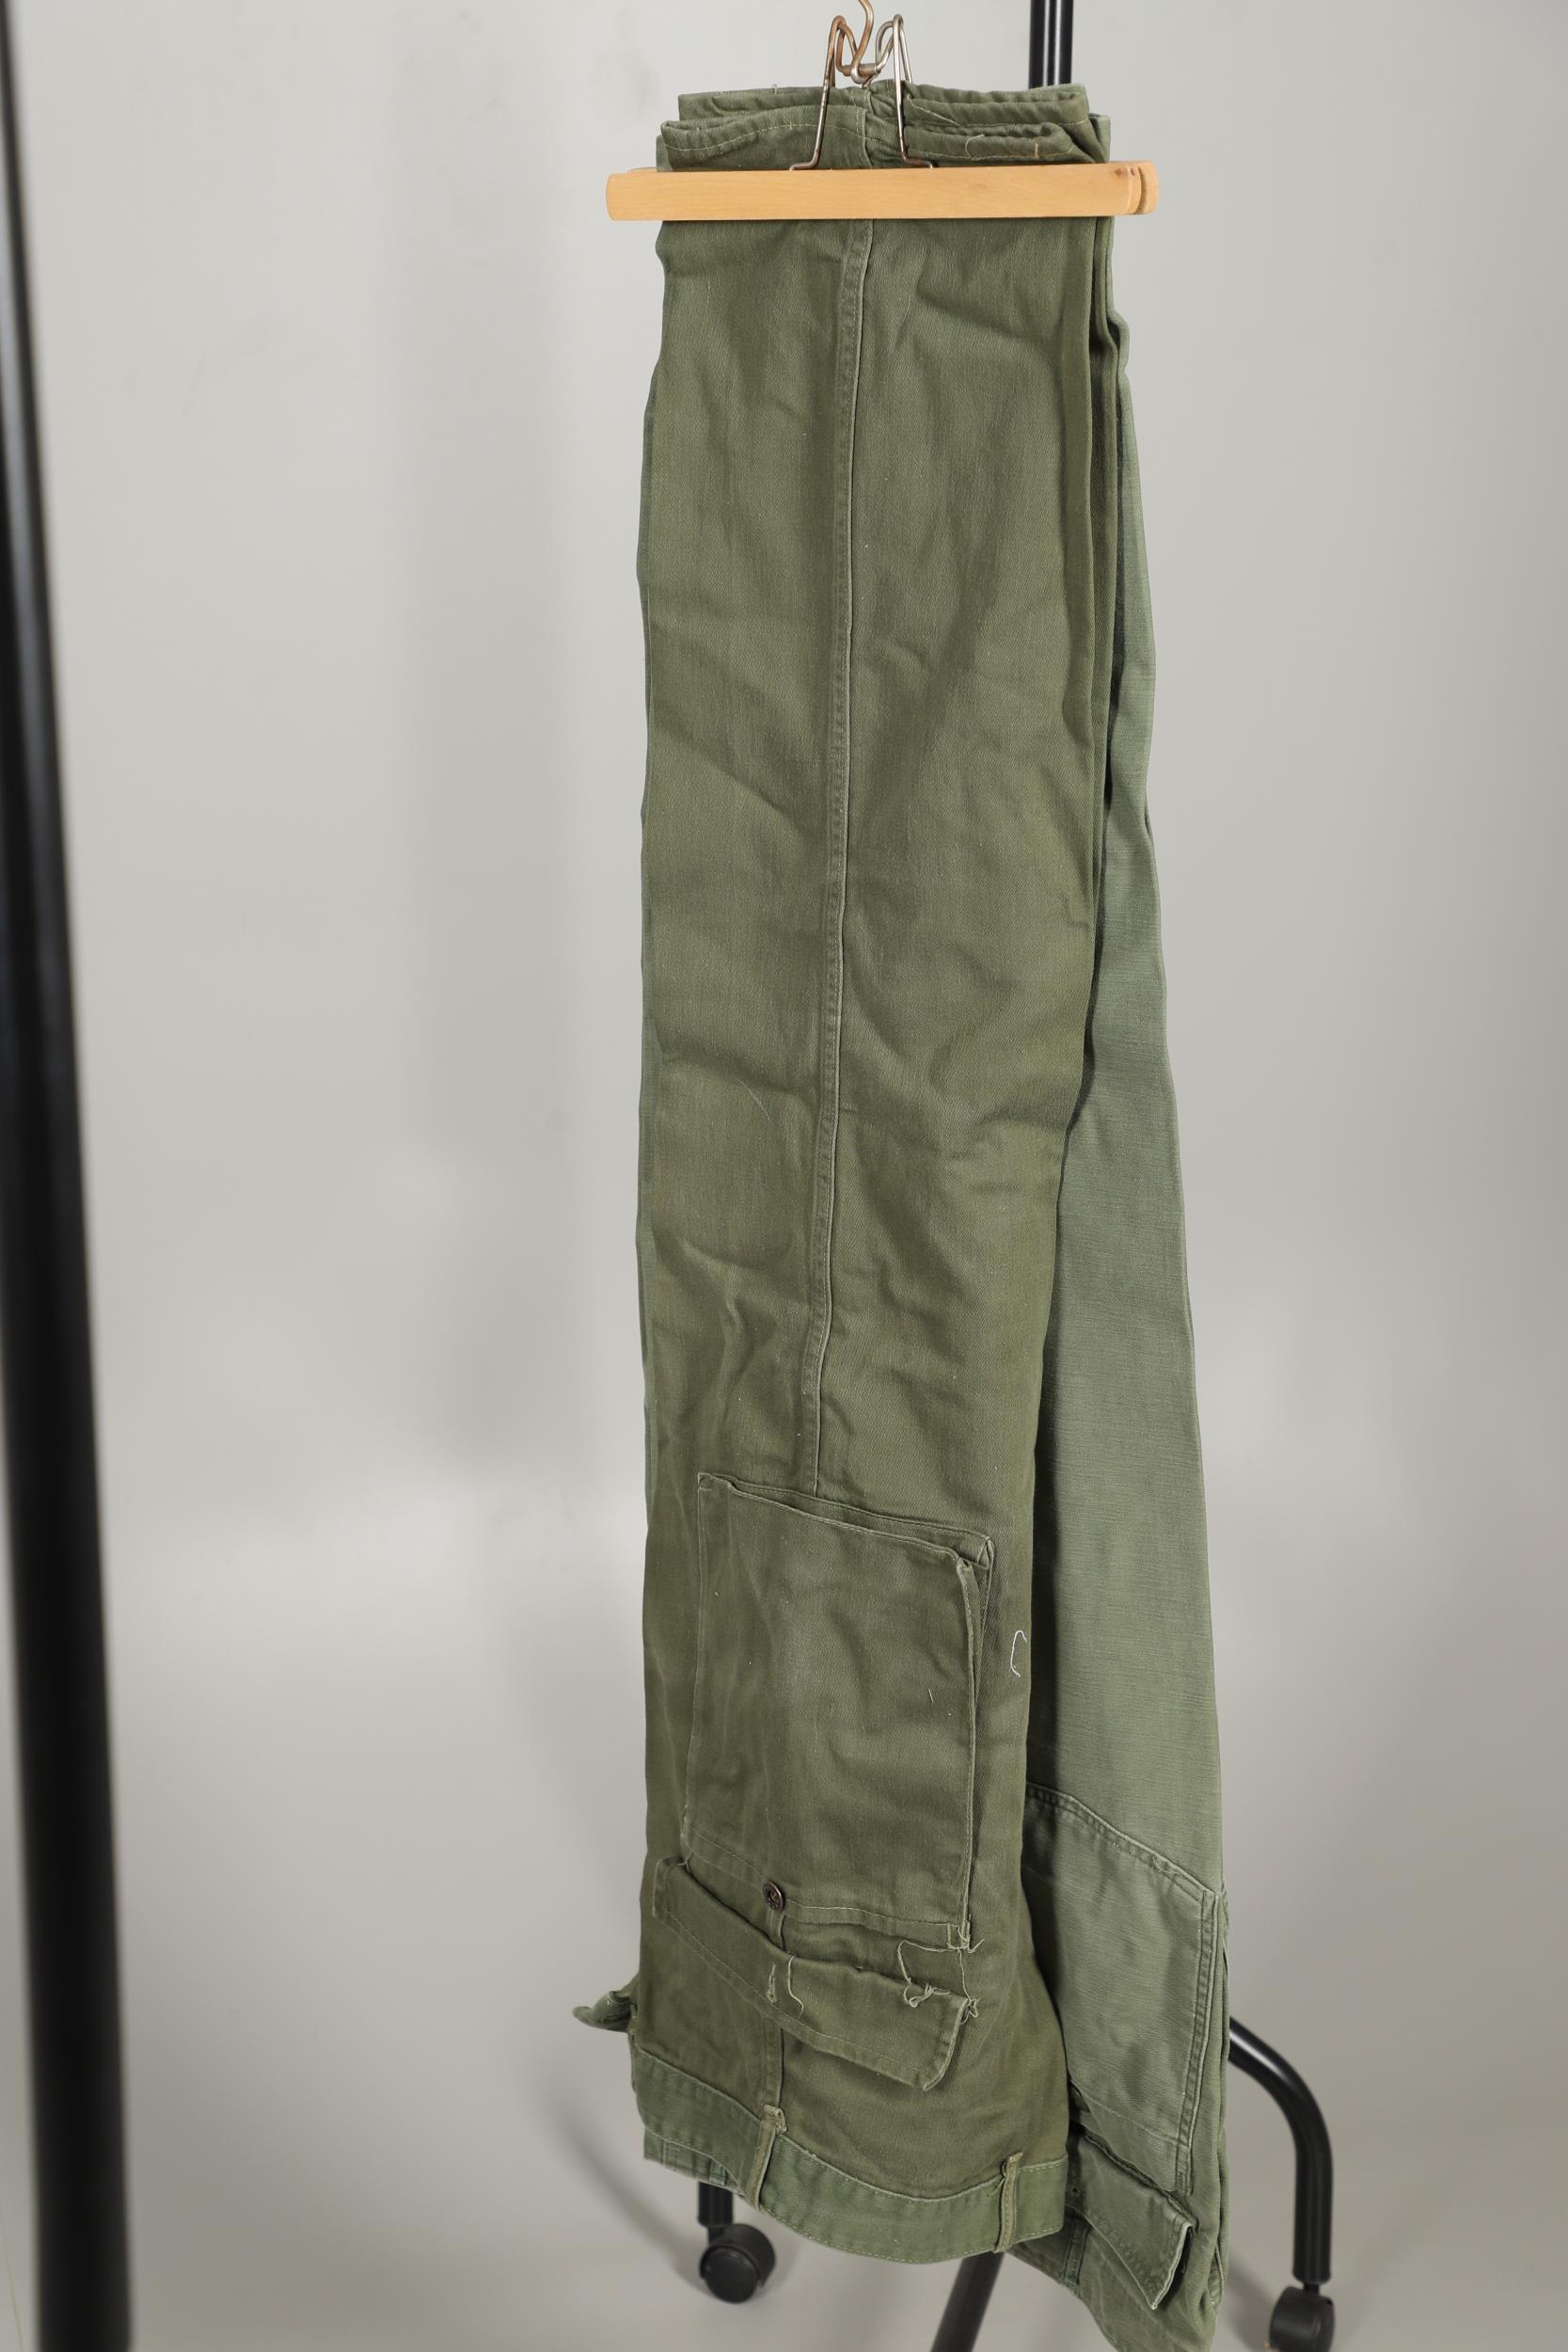 AN AMERICAN ARMY M65 FIELD COAT AND OTHERS. - Image 13 of 15